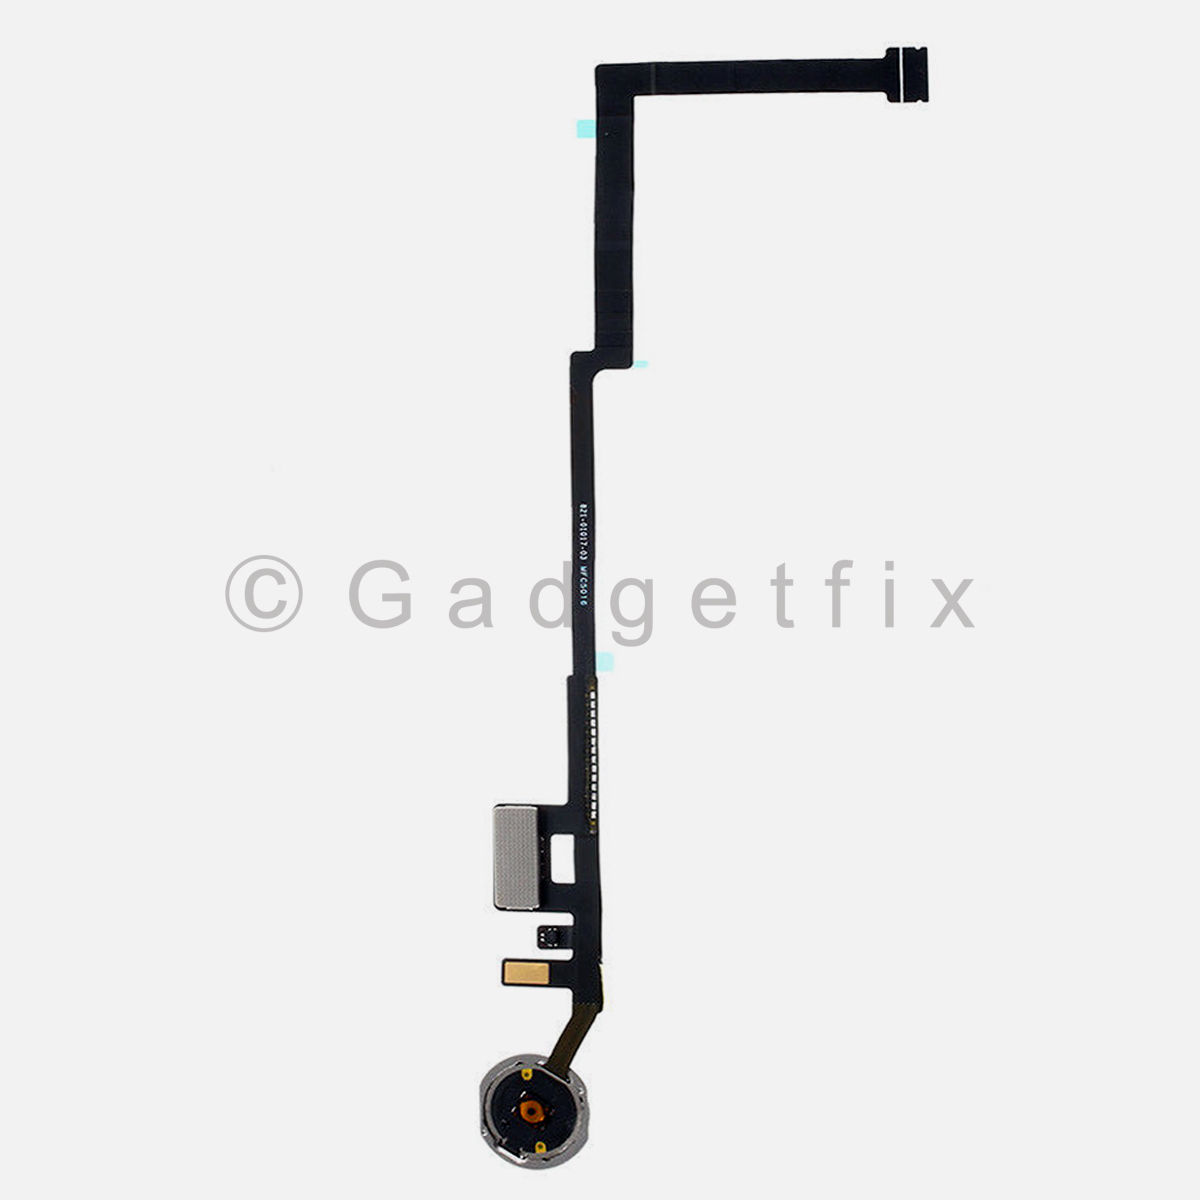 White | Gold Home Button Key Flex Cable Connector For iPad 5th Gen 9.7" 2017 A1822 A1823